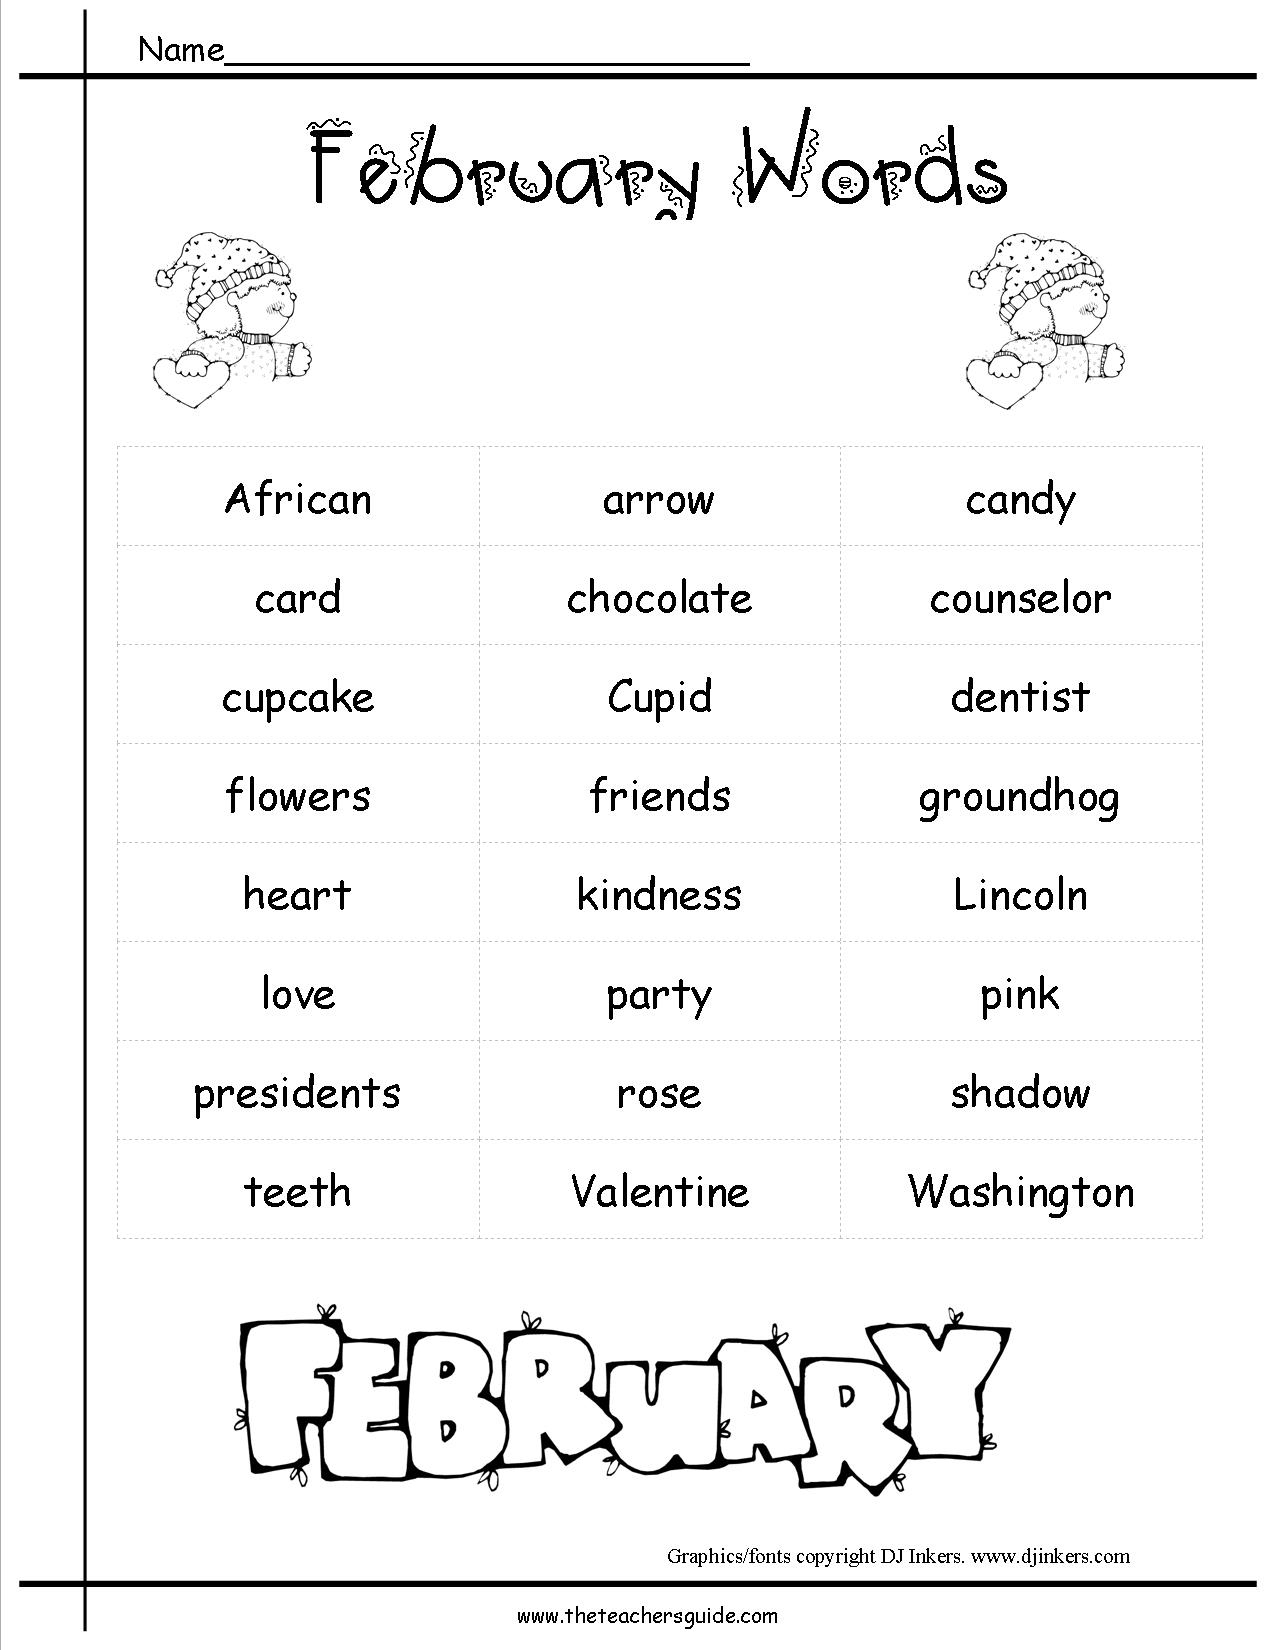 February Lesson Plans, Printouts, Themes, Crafts And Holidays